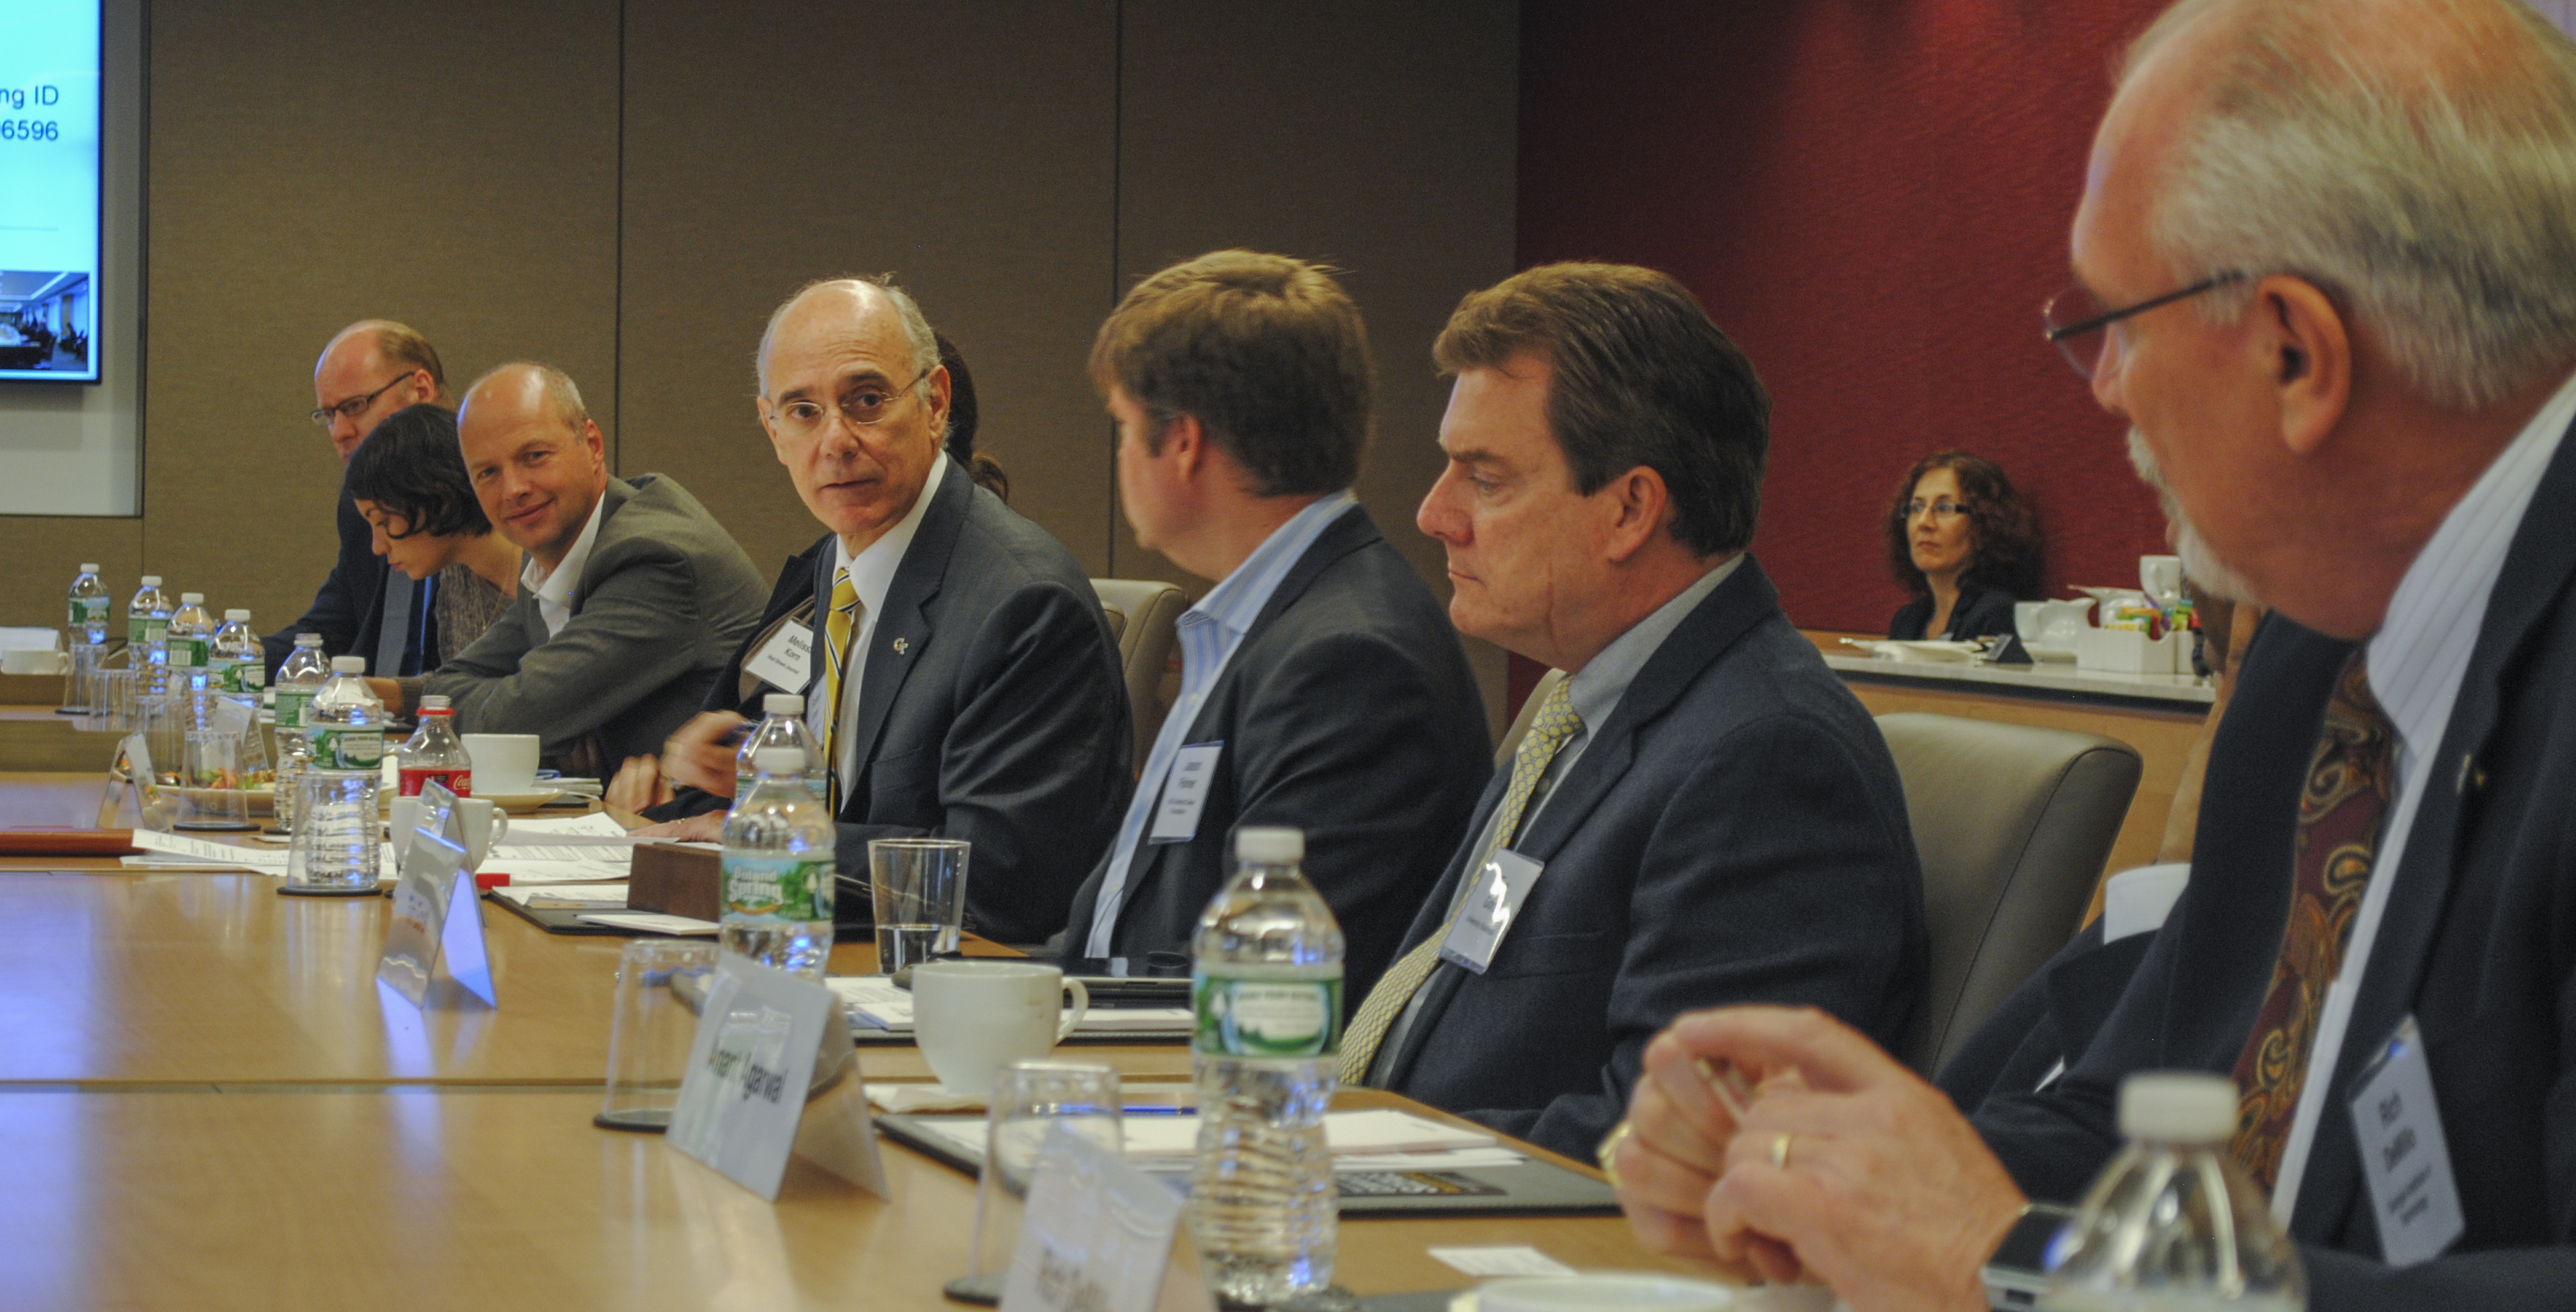 Georgia Tech Provost Rafael L. Bras hosts a national media roundtable on Technology and the Future of Online Higher Education at the Carnegie Corporation of New York in New York City.